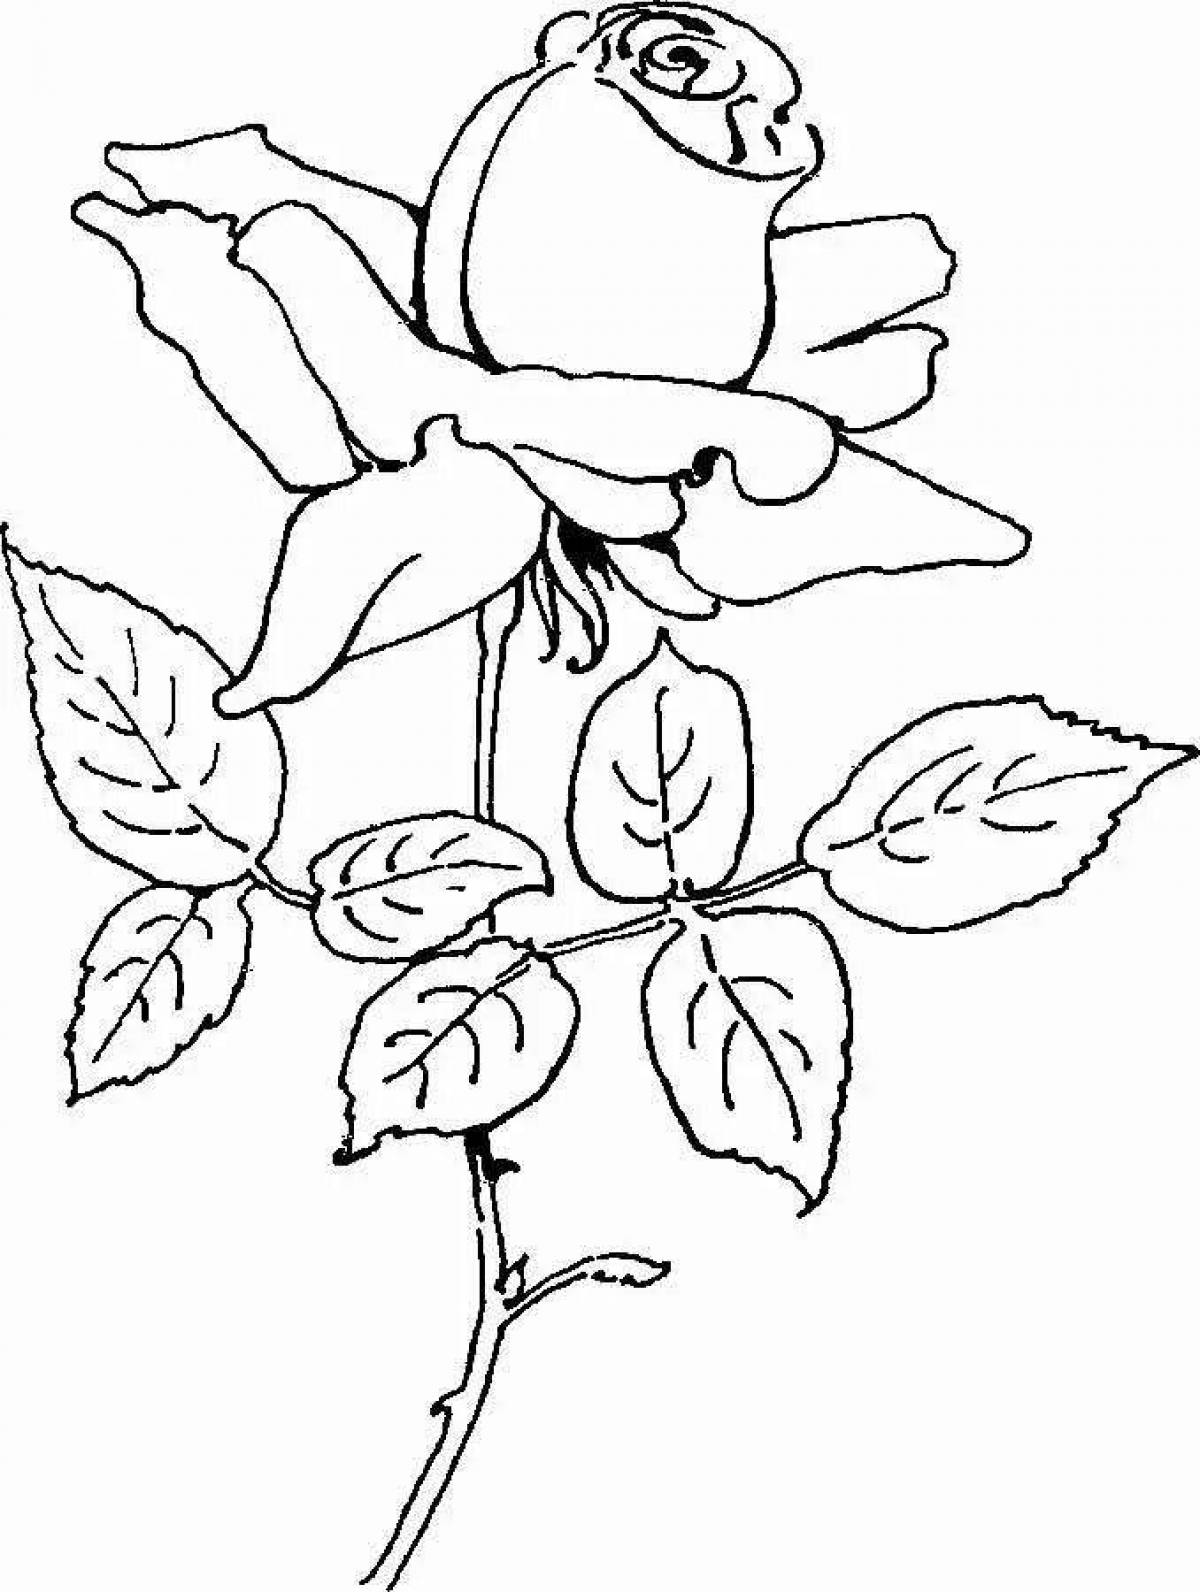 Colorable toad and rose coloring book